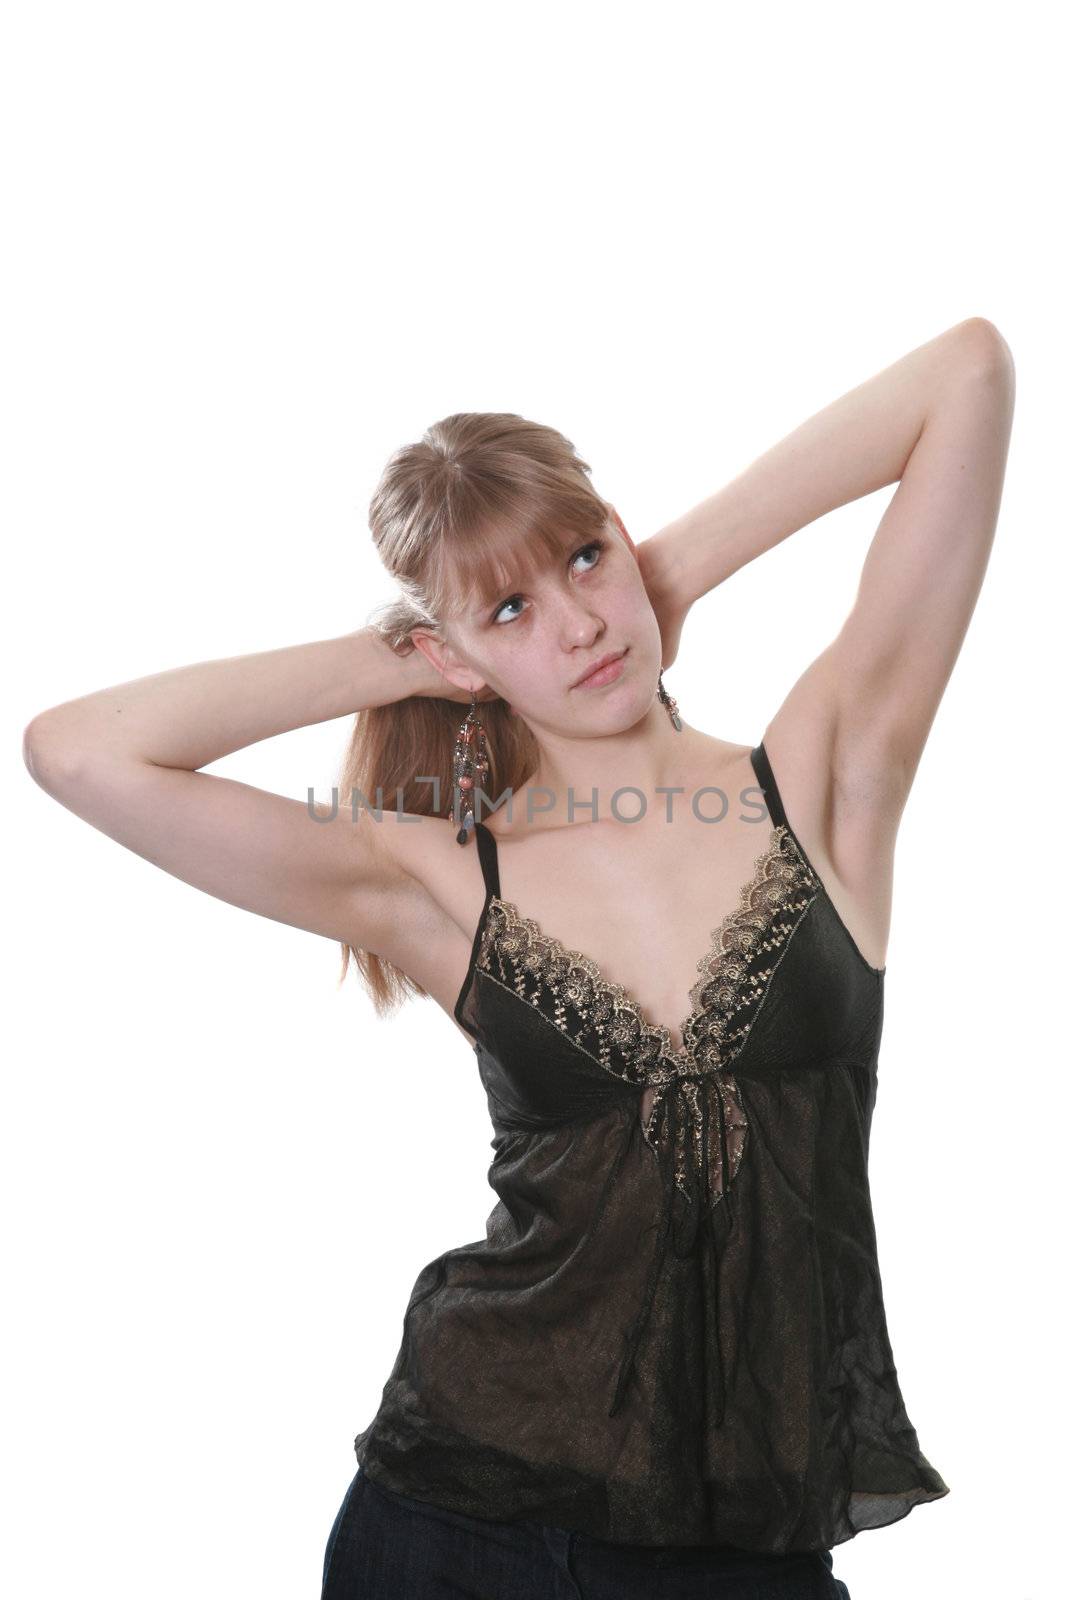 The young woman poses on a white background